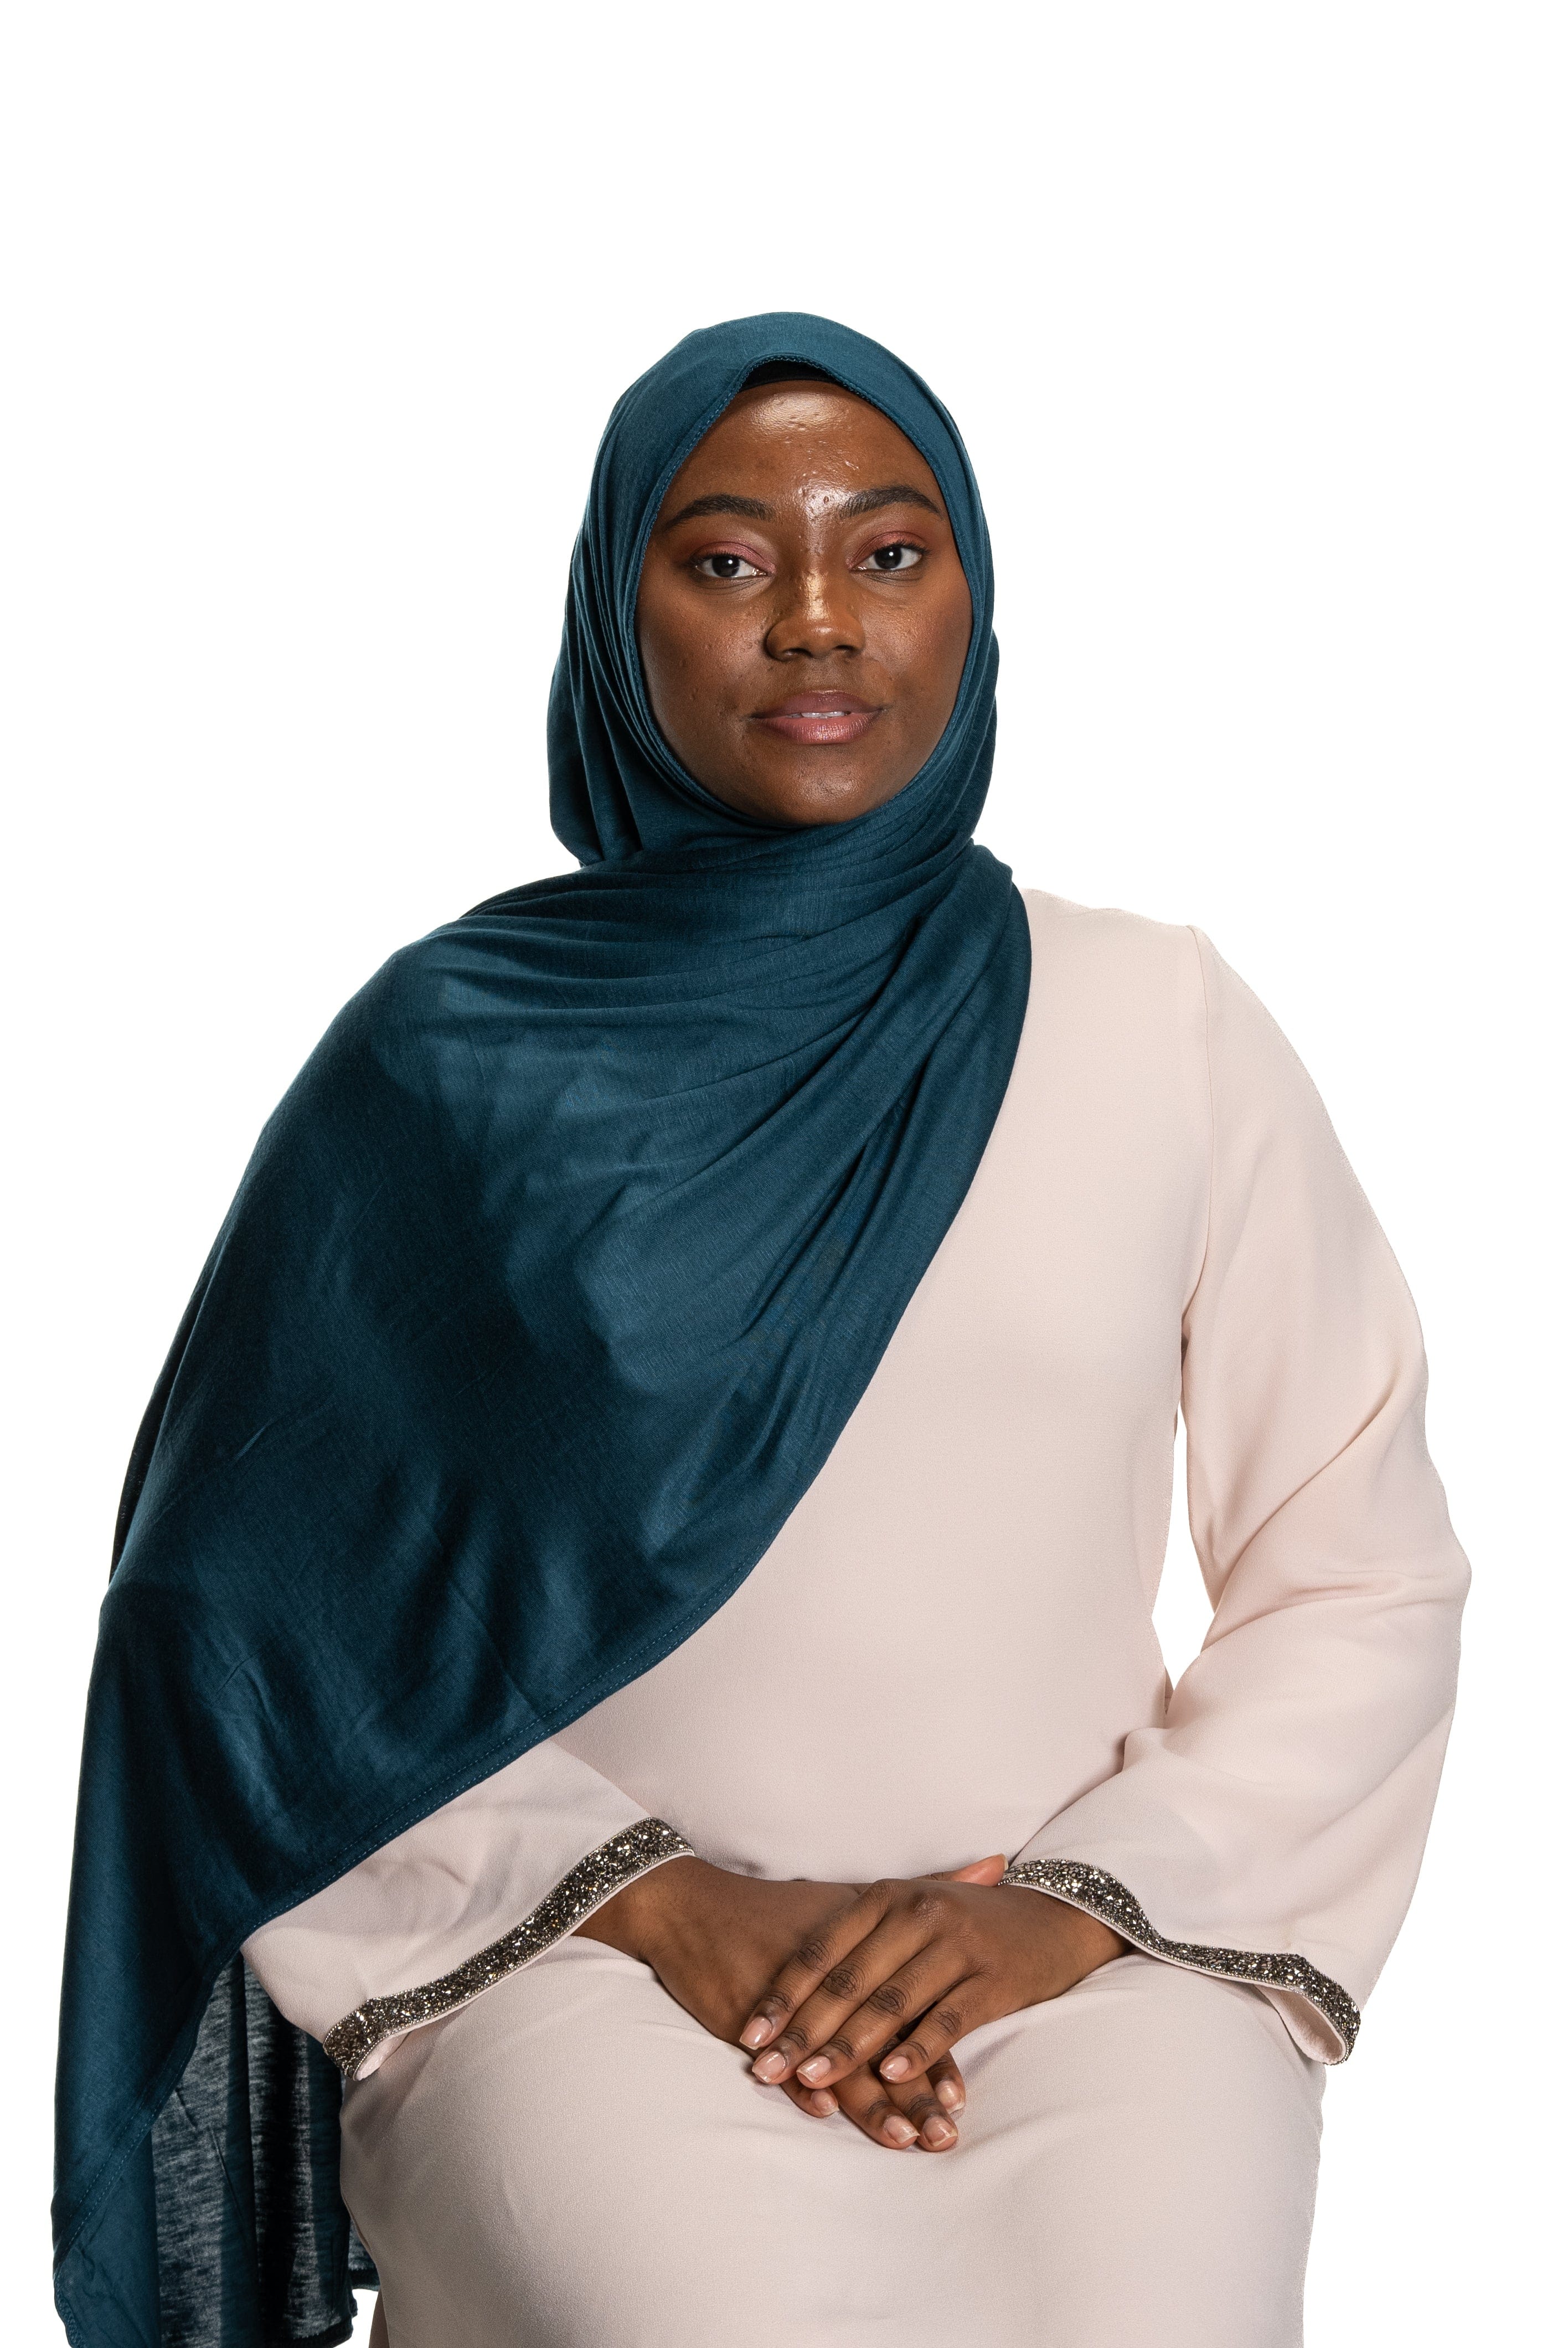 Jolie Nisa Hijab Teal Premium Slip-on Jersey Instant Head Scarf Wrap for Effortless and Stylish Hijab Wear Premium Slip-on instant Jersey Head Scarf Wrap for Effortless and Stylish Hijab Wear!